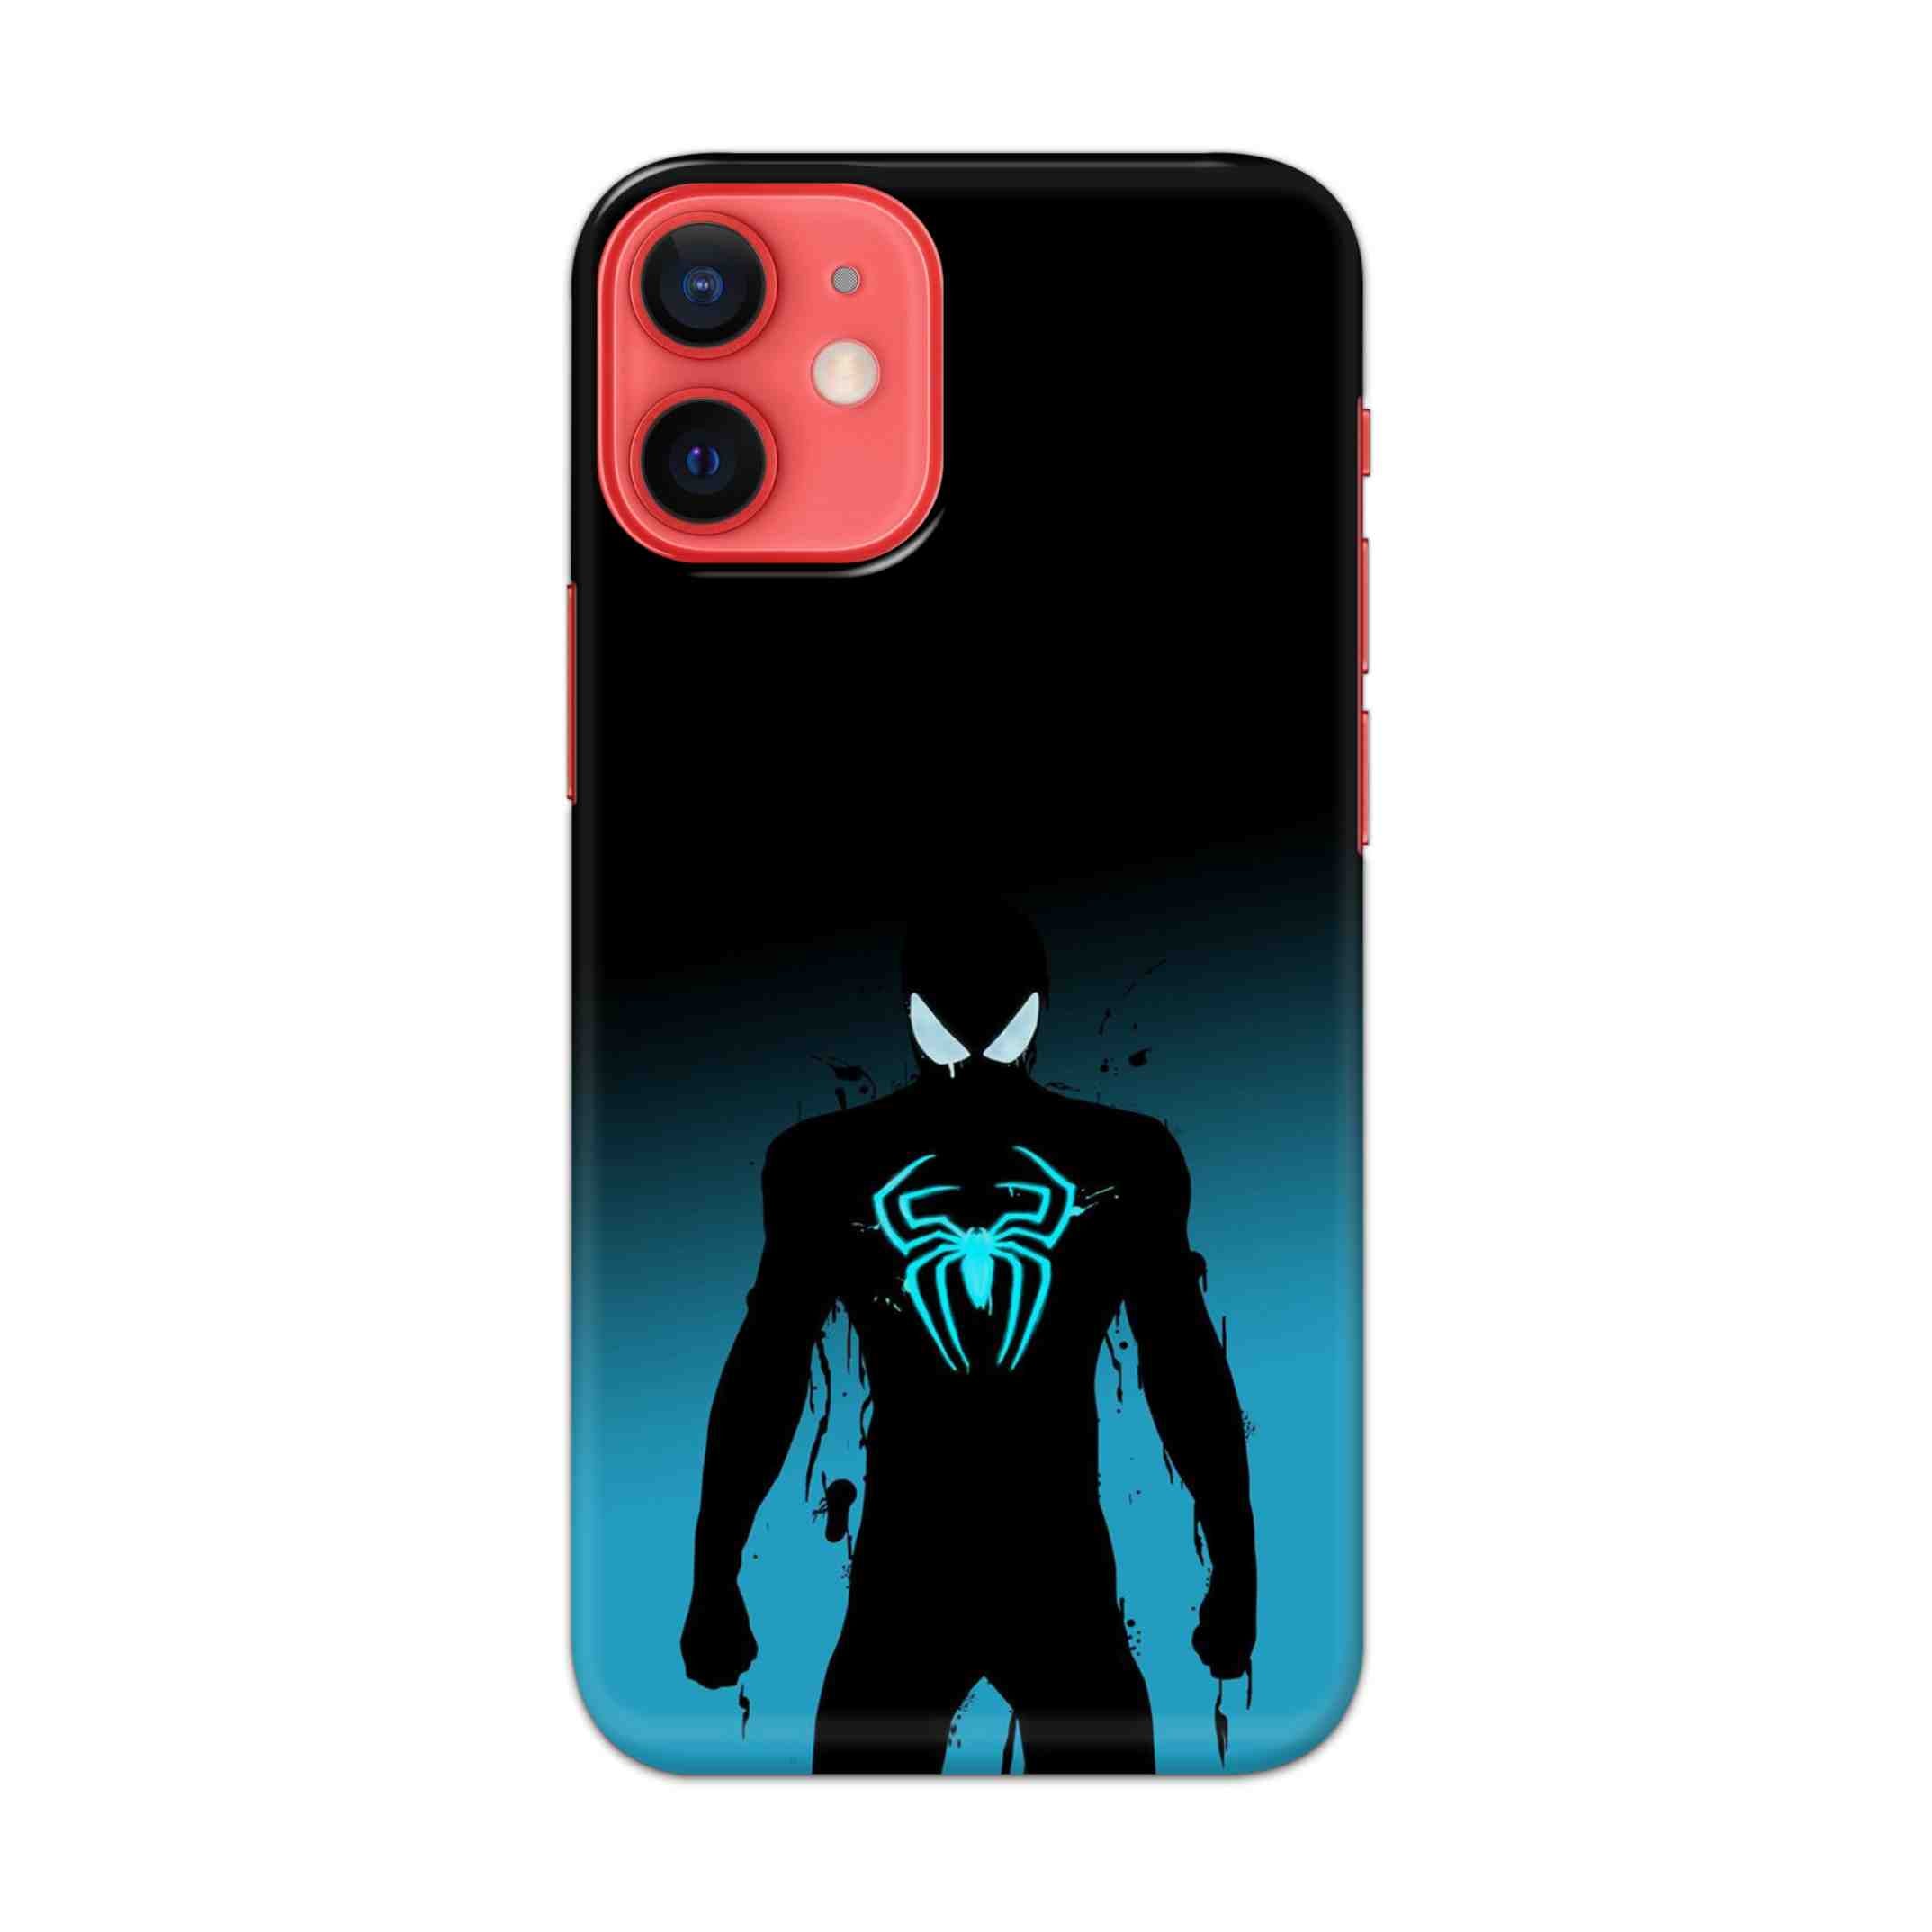 Buy Neon Spiderman Hard Back Mobile Phone Case/Cover For Apple iPhone 12 mini Online